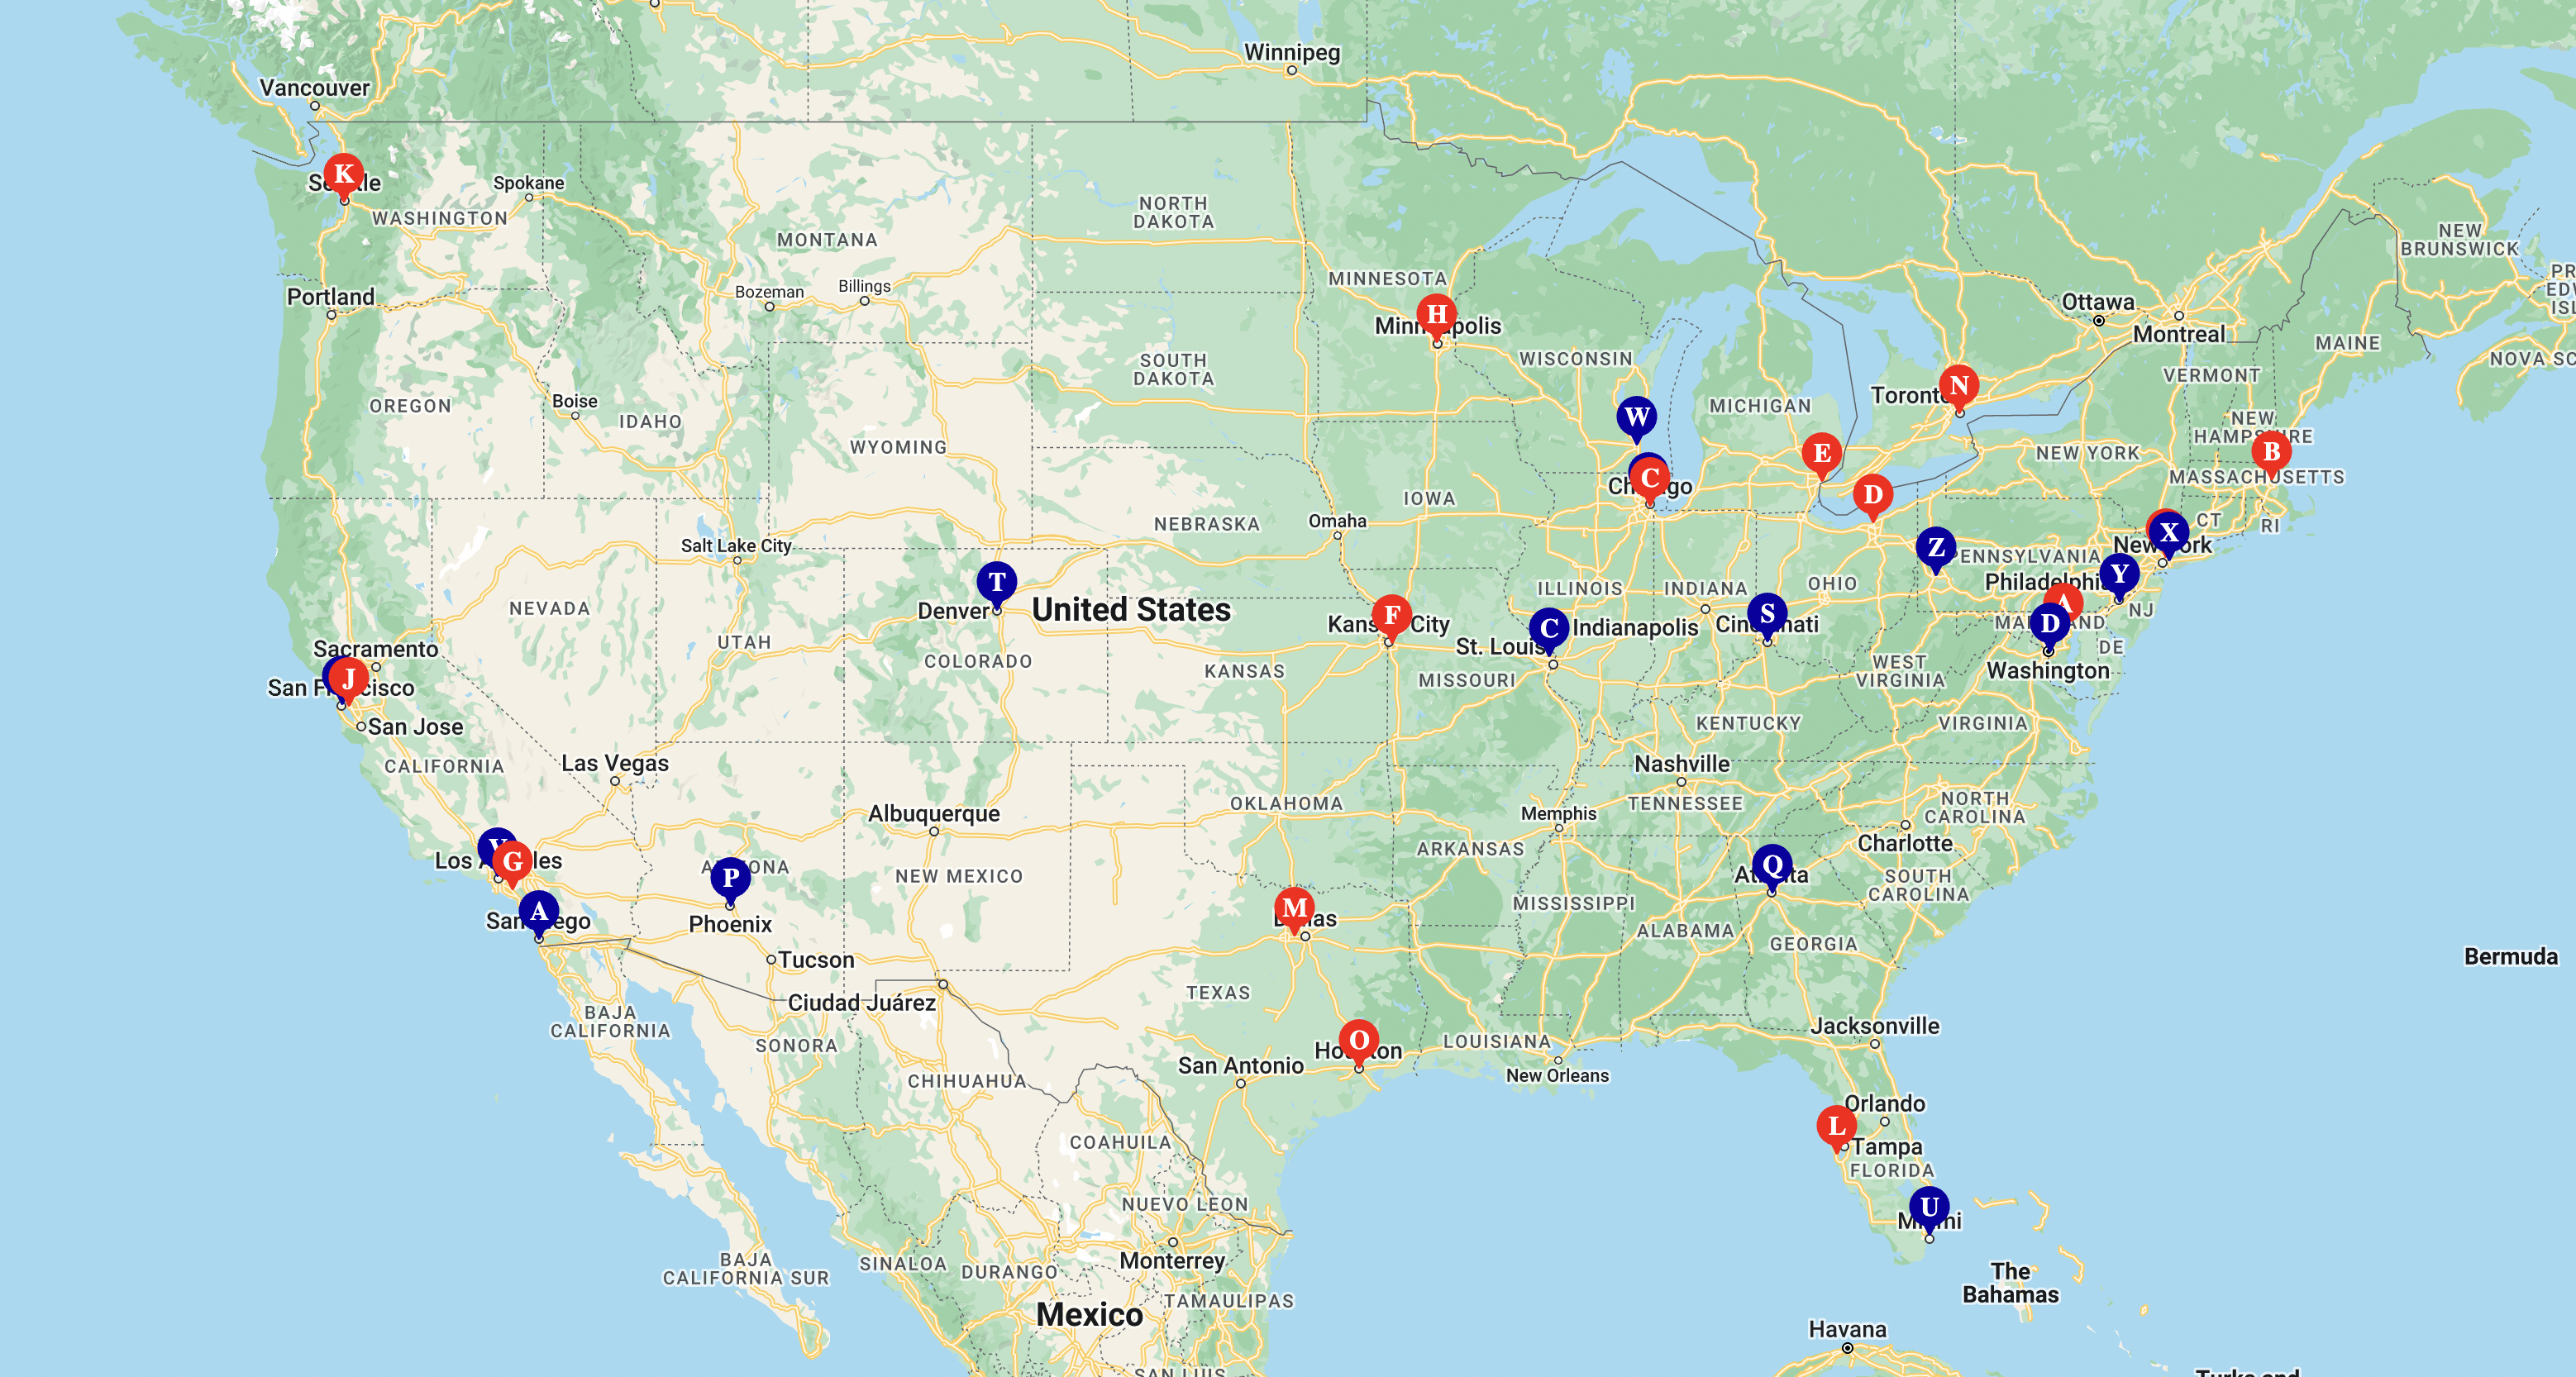 Example of a map with multiple locations featuring Major League Baseball Stadiums created by Mapize.